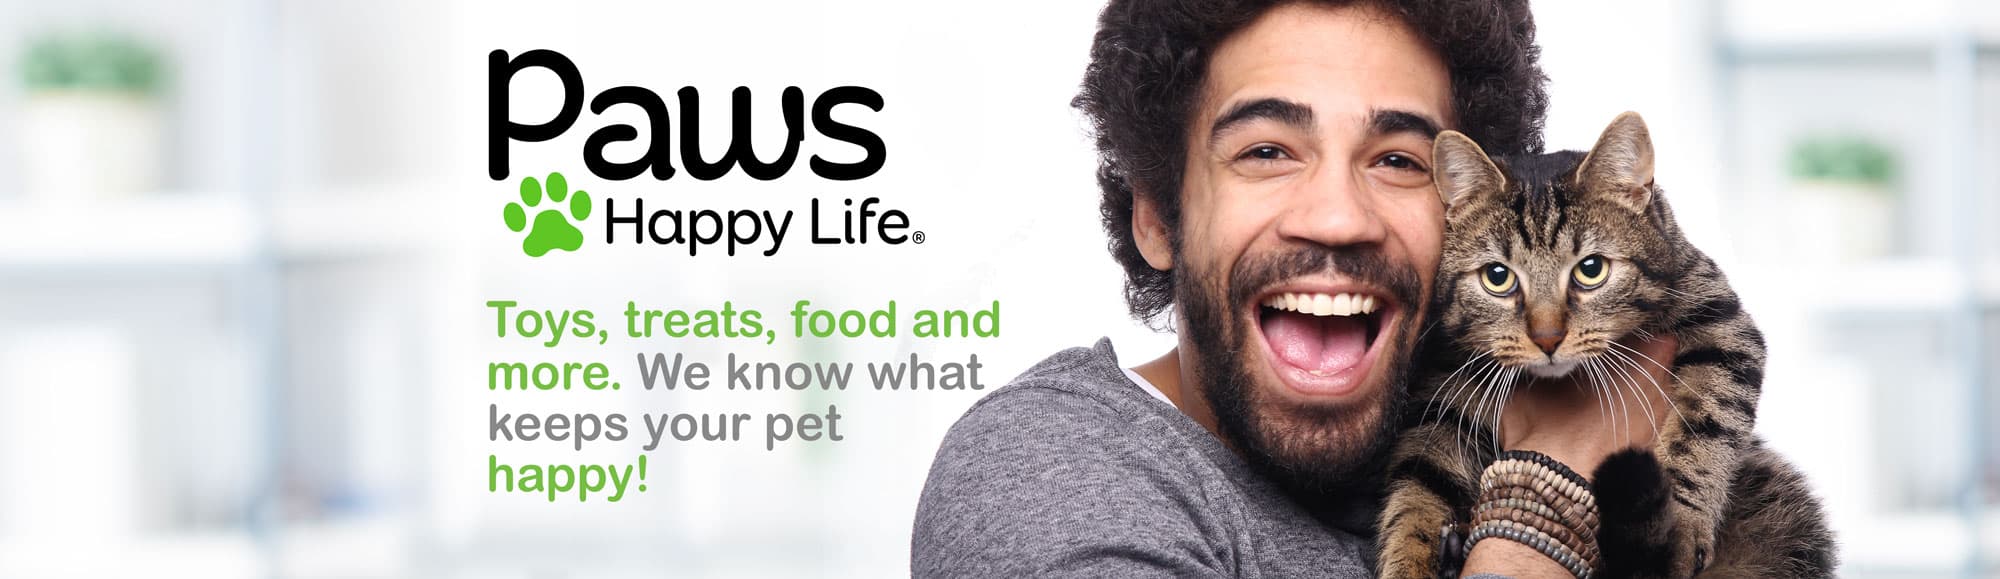 Toys, treats, food and more. We know what keeps your pet happy!